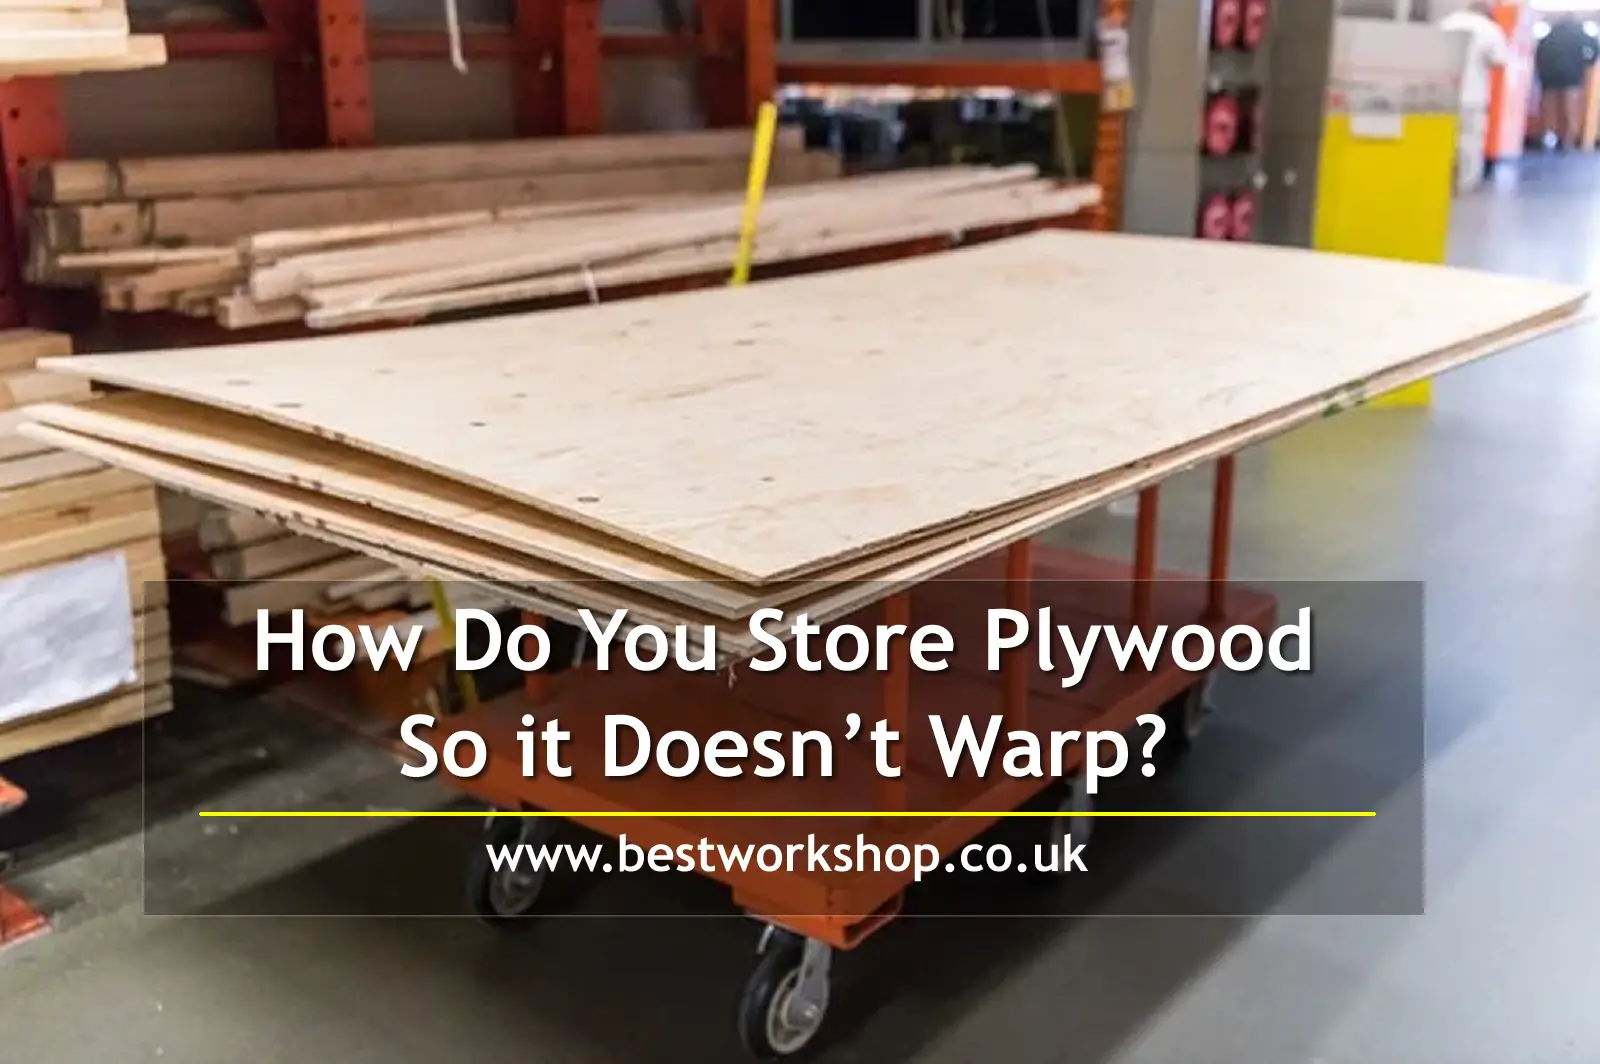 How Do You Store Plywood So it Doesn’t Warp?